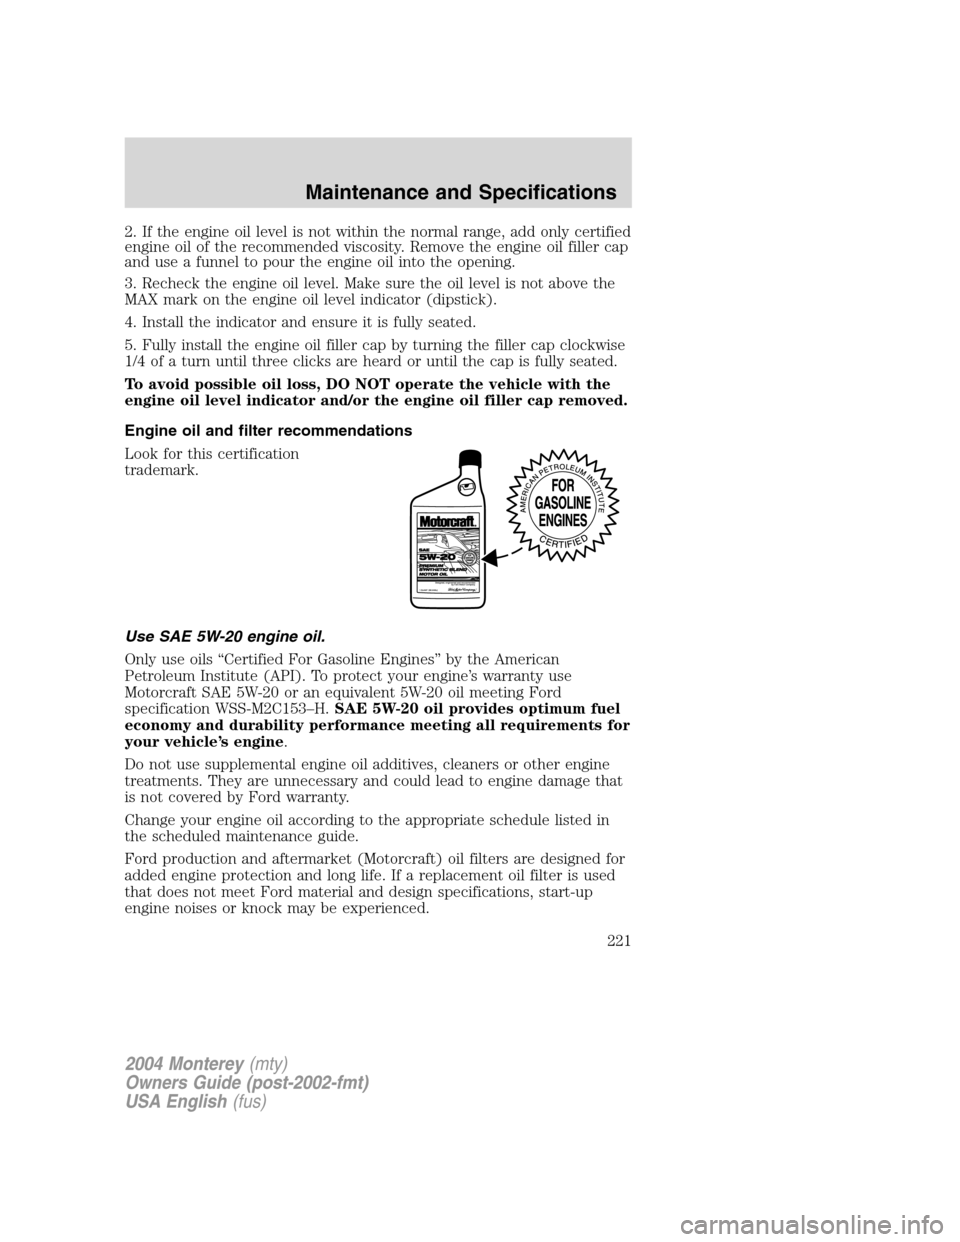 Mercury Monterey 2004  Owners Manuals 2. If the engine oil level is not within the normal range, add only certified
engine oil of the recommended viscosity. Remove the engine oil filler cap
and use a funnel to pour the engine oil into the